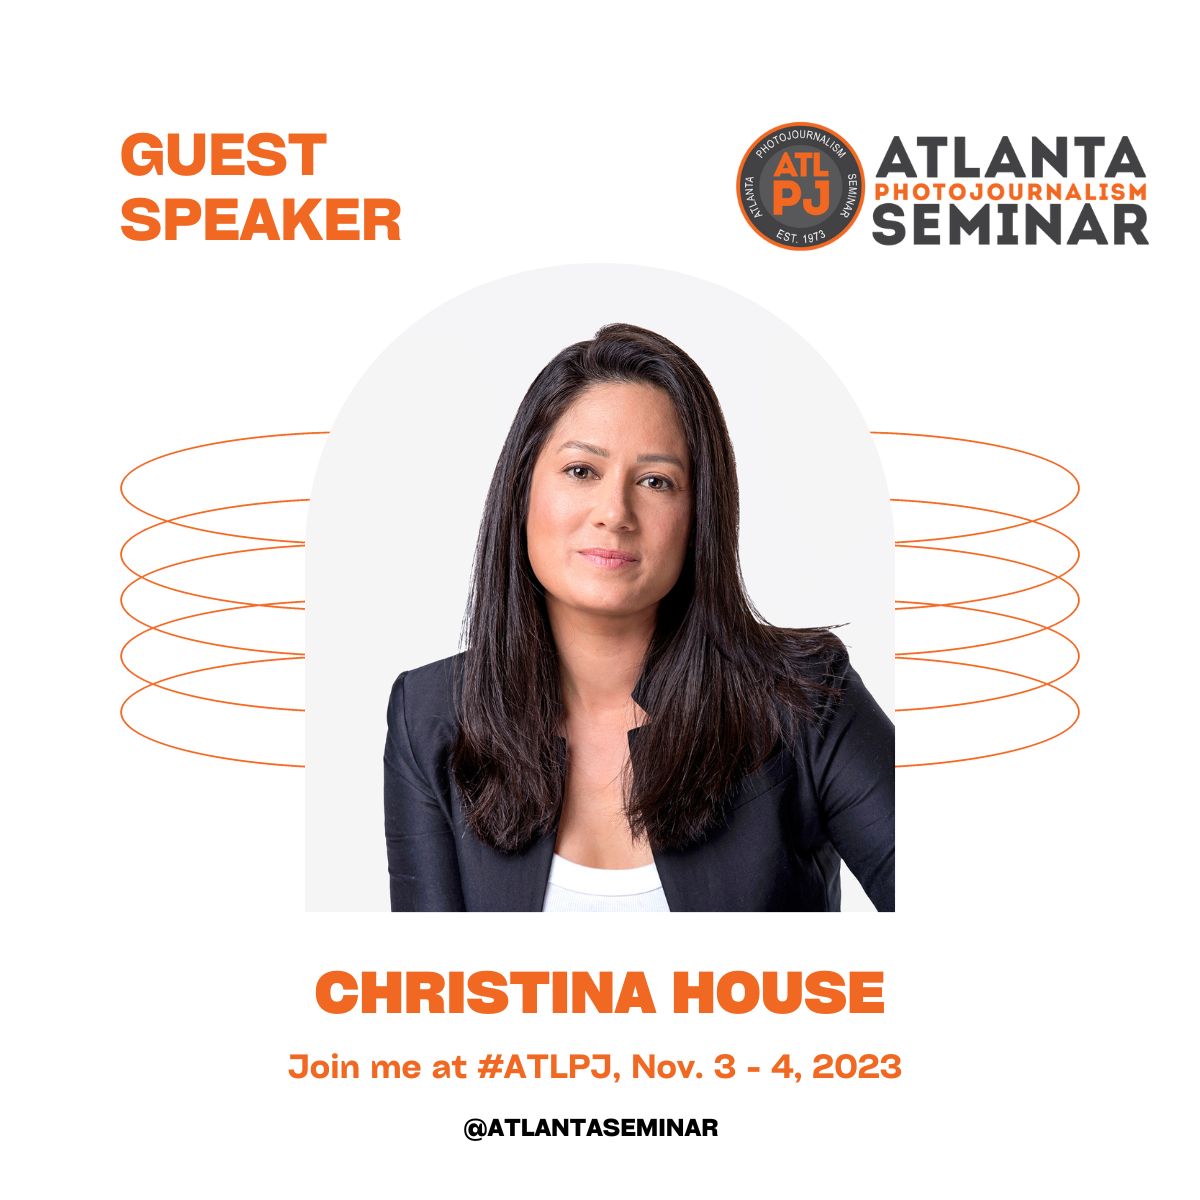 Meet #ATLPJ 2023 Speaker Christina House View her bio and plan to attend The Seminar Nov. 3-4 photojournalism.org/2023-speakers